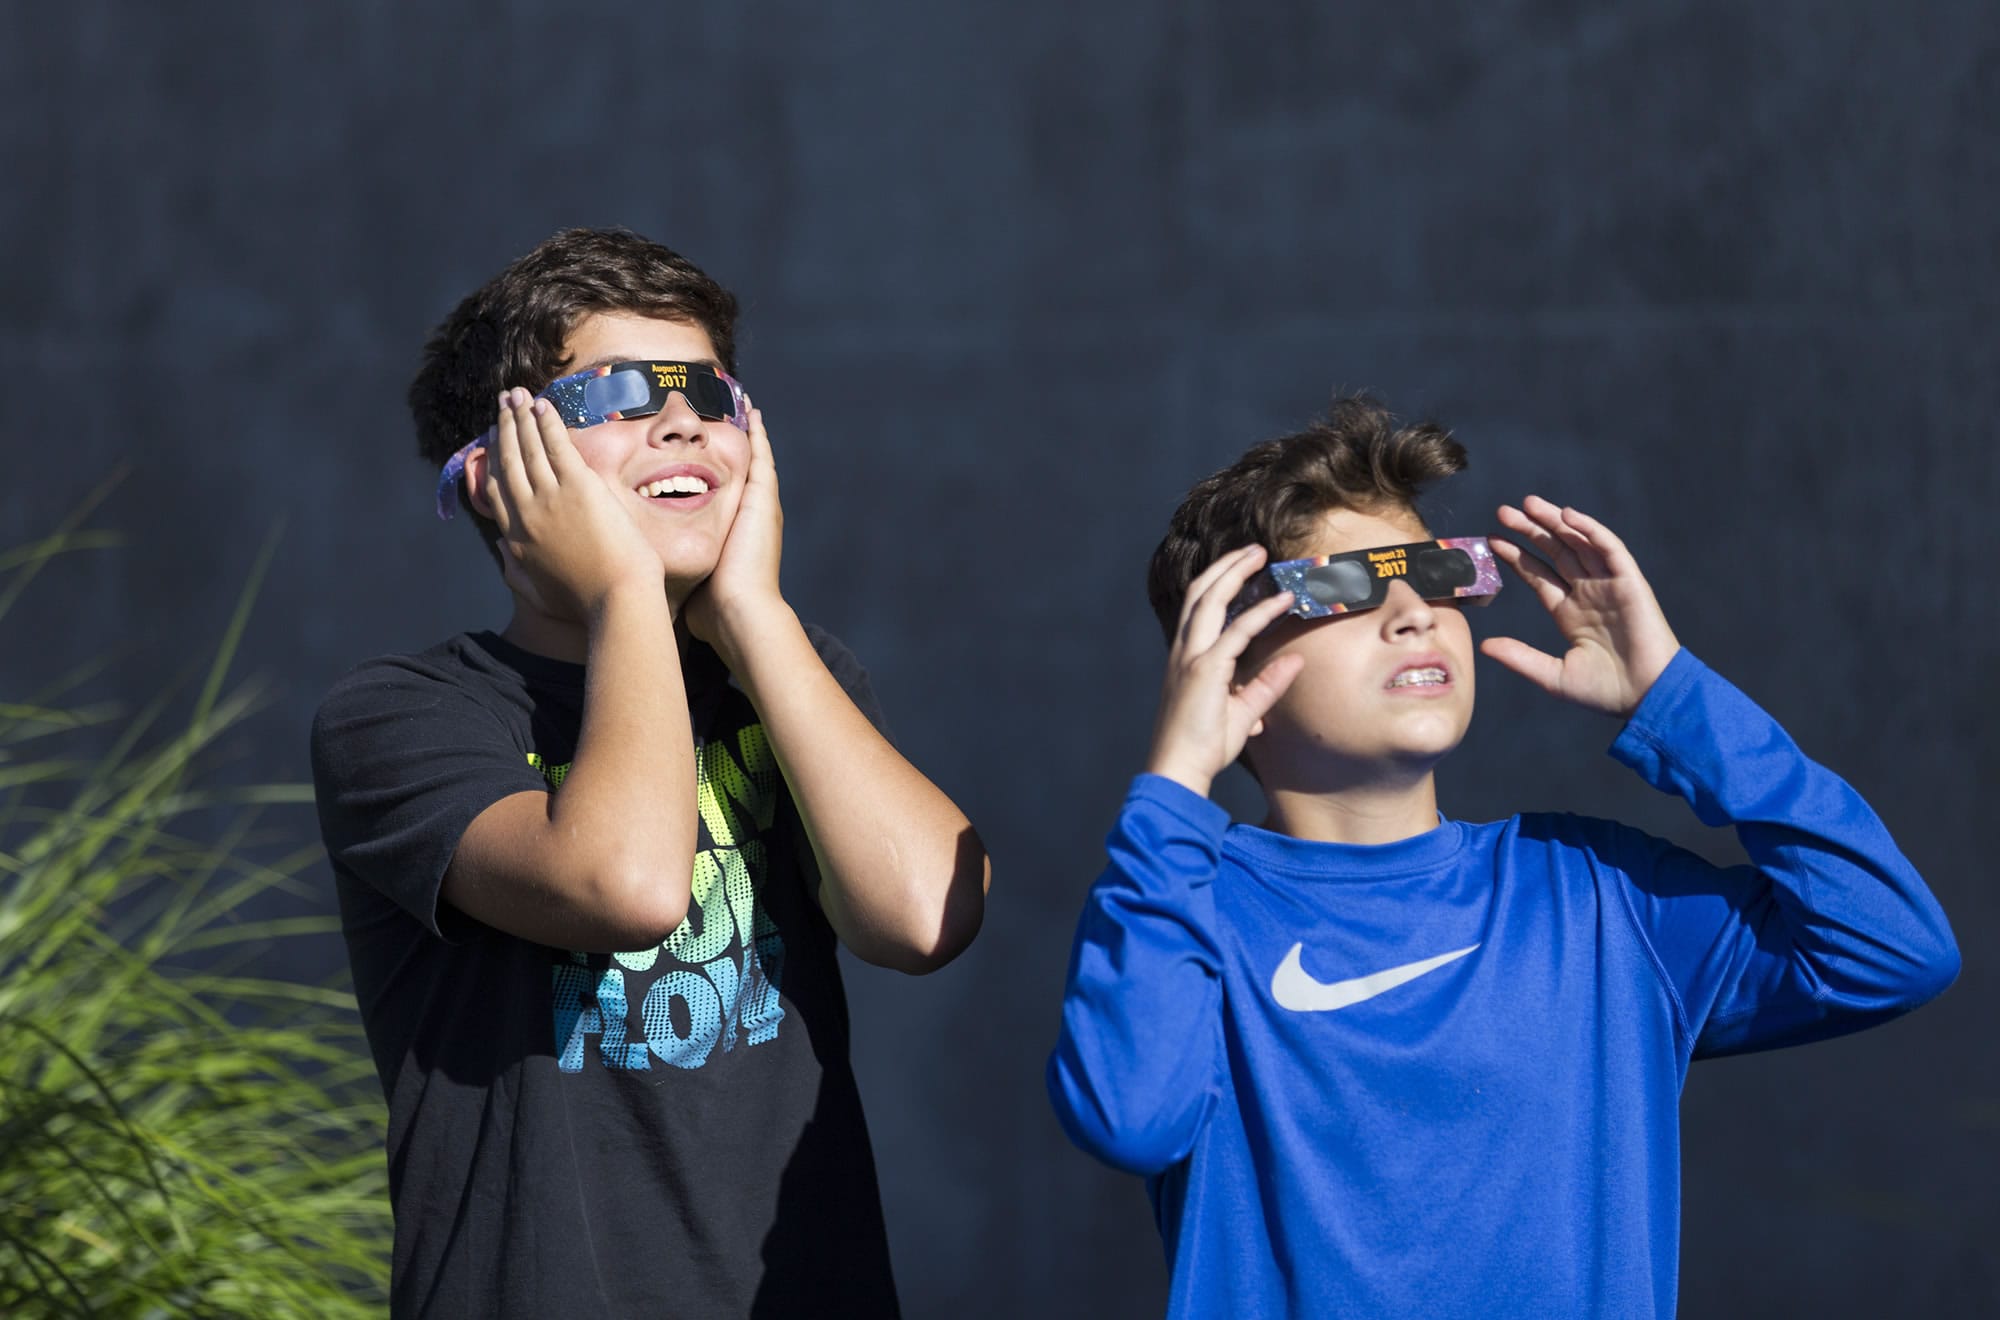 Braden Miller, 14, left, and Jonah Miller, 13, from Vancouver, watch the solar eclipse from Vancouver Community Library in Vancouver on Monday morning, Aug. 21, 2017. The last total solar eclipse that was viewable from the United States was in February 26, 1979.